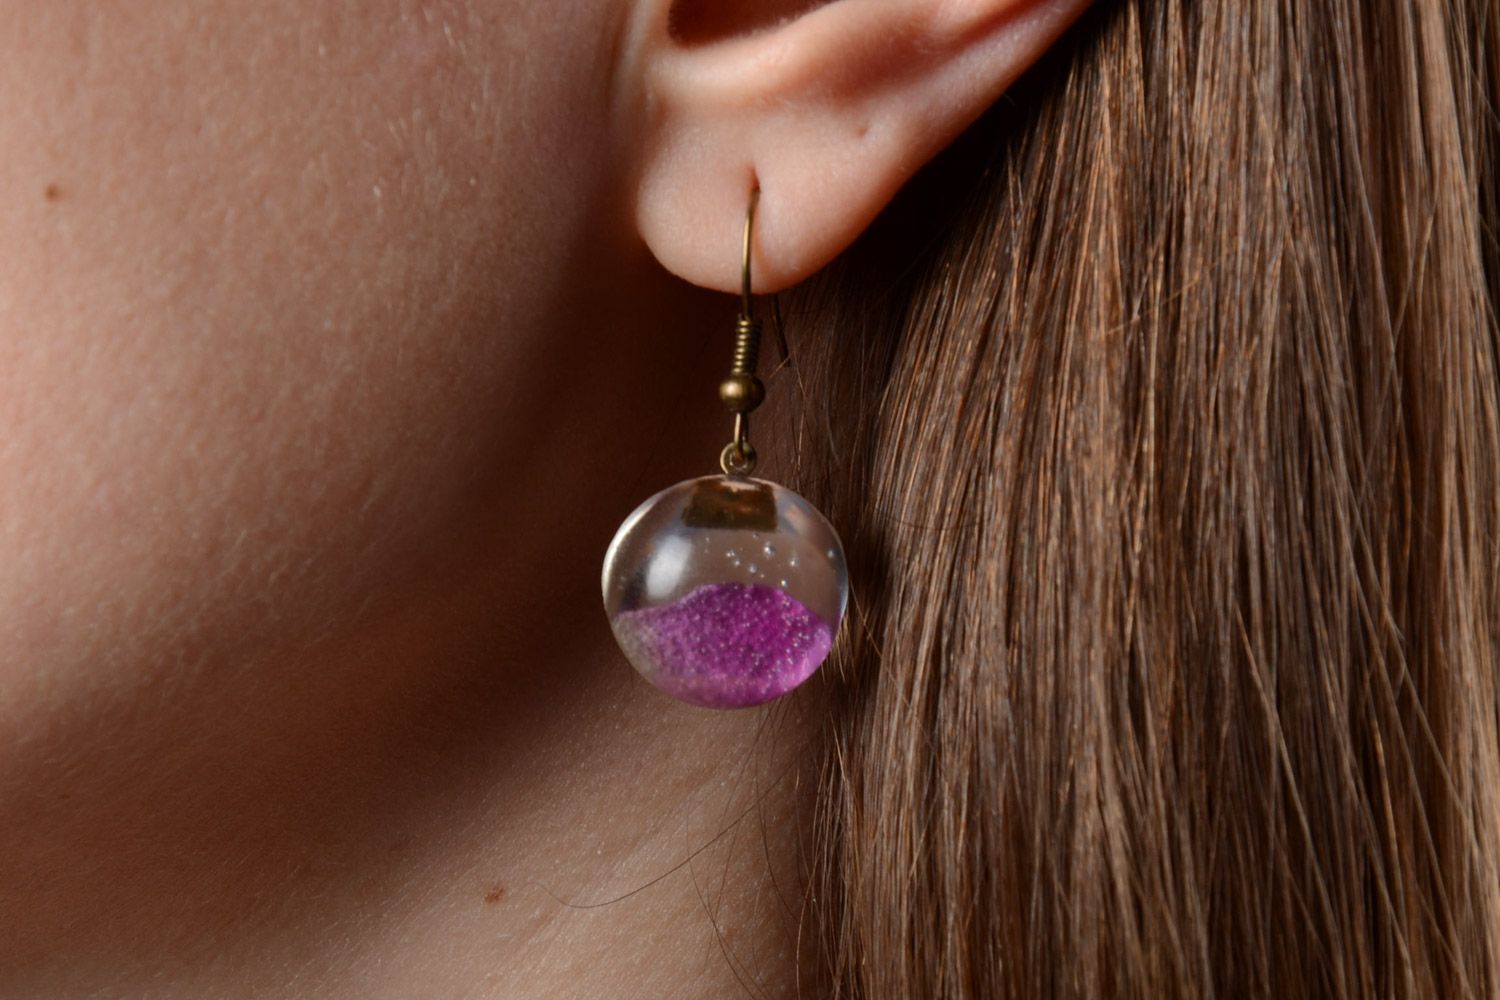 Handmade round earrings with real flower petals coated with epoxy photo 5